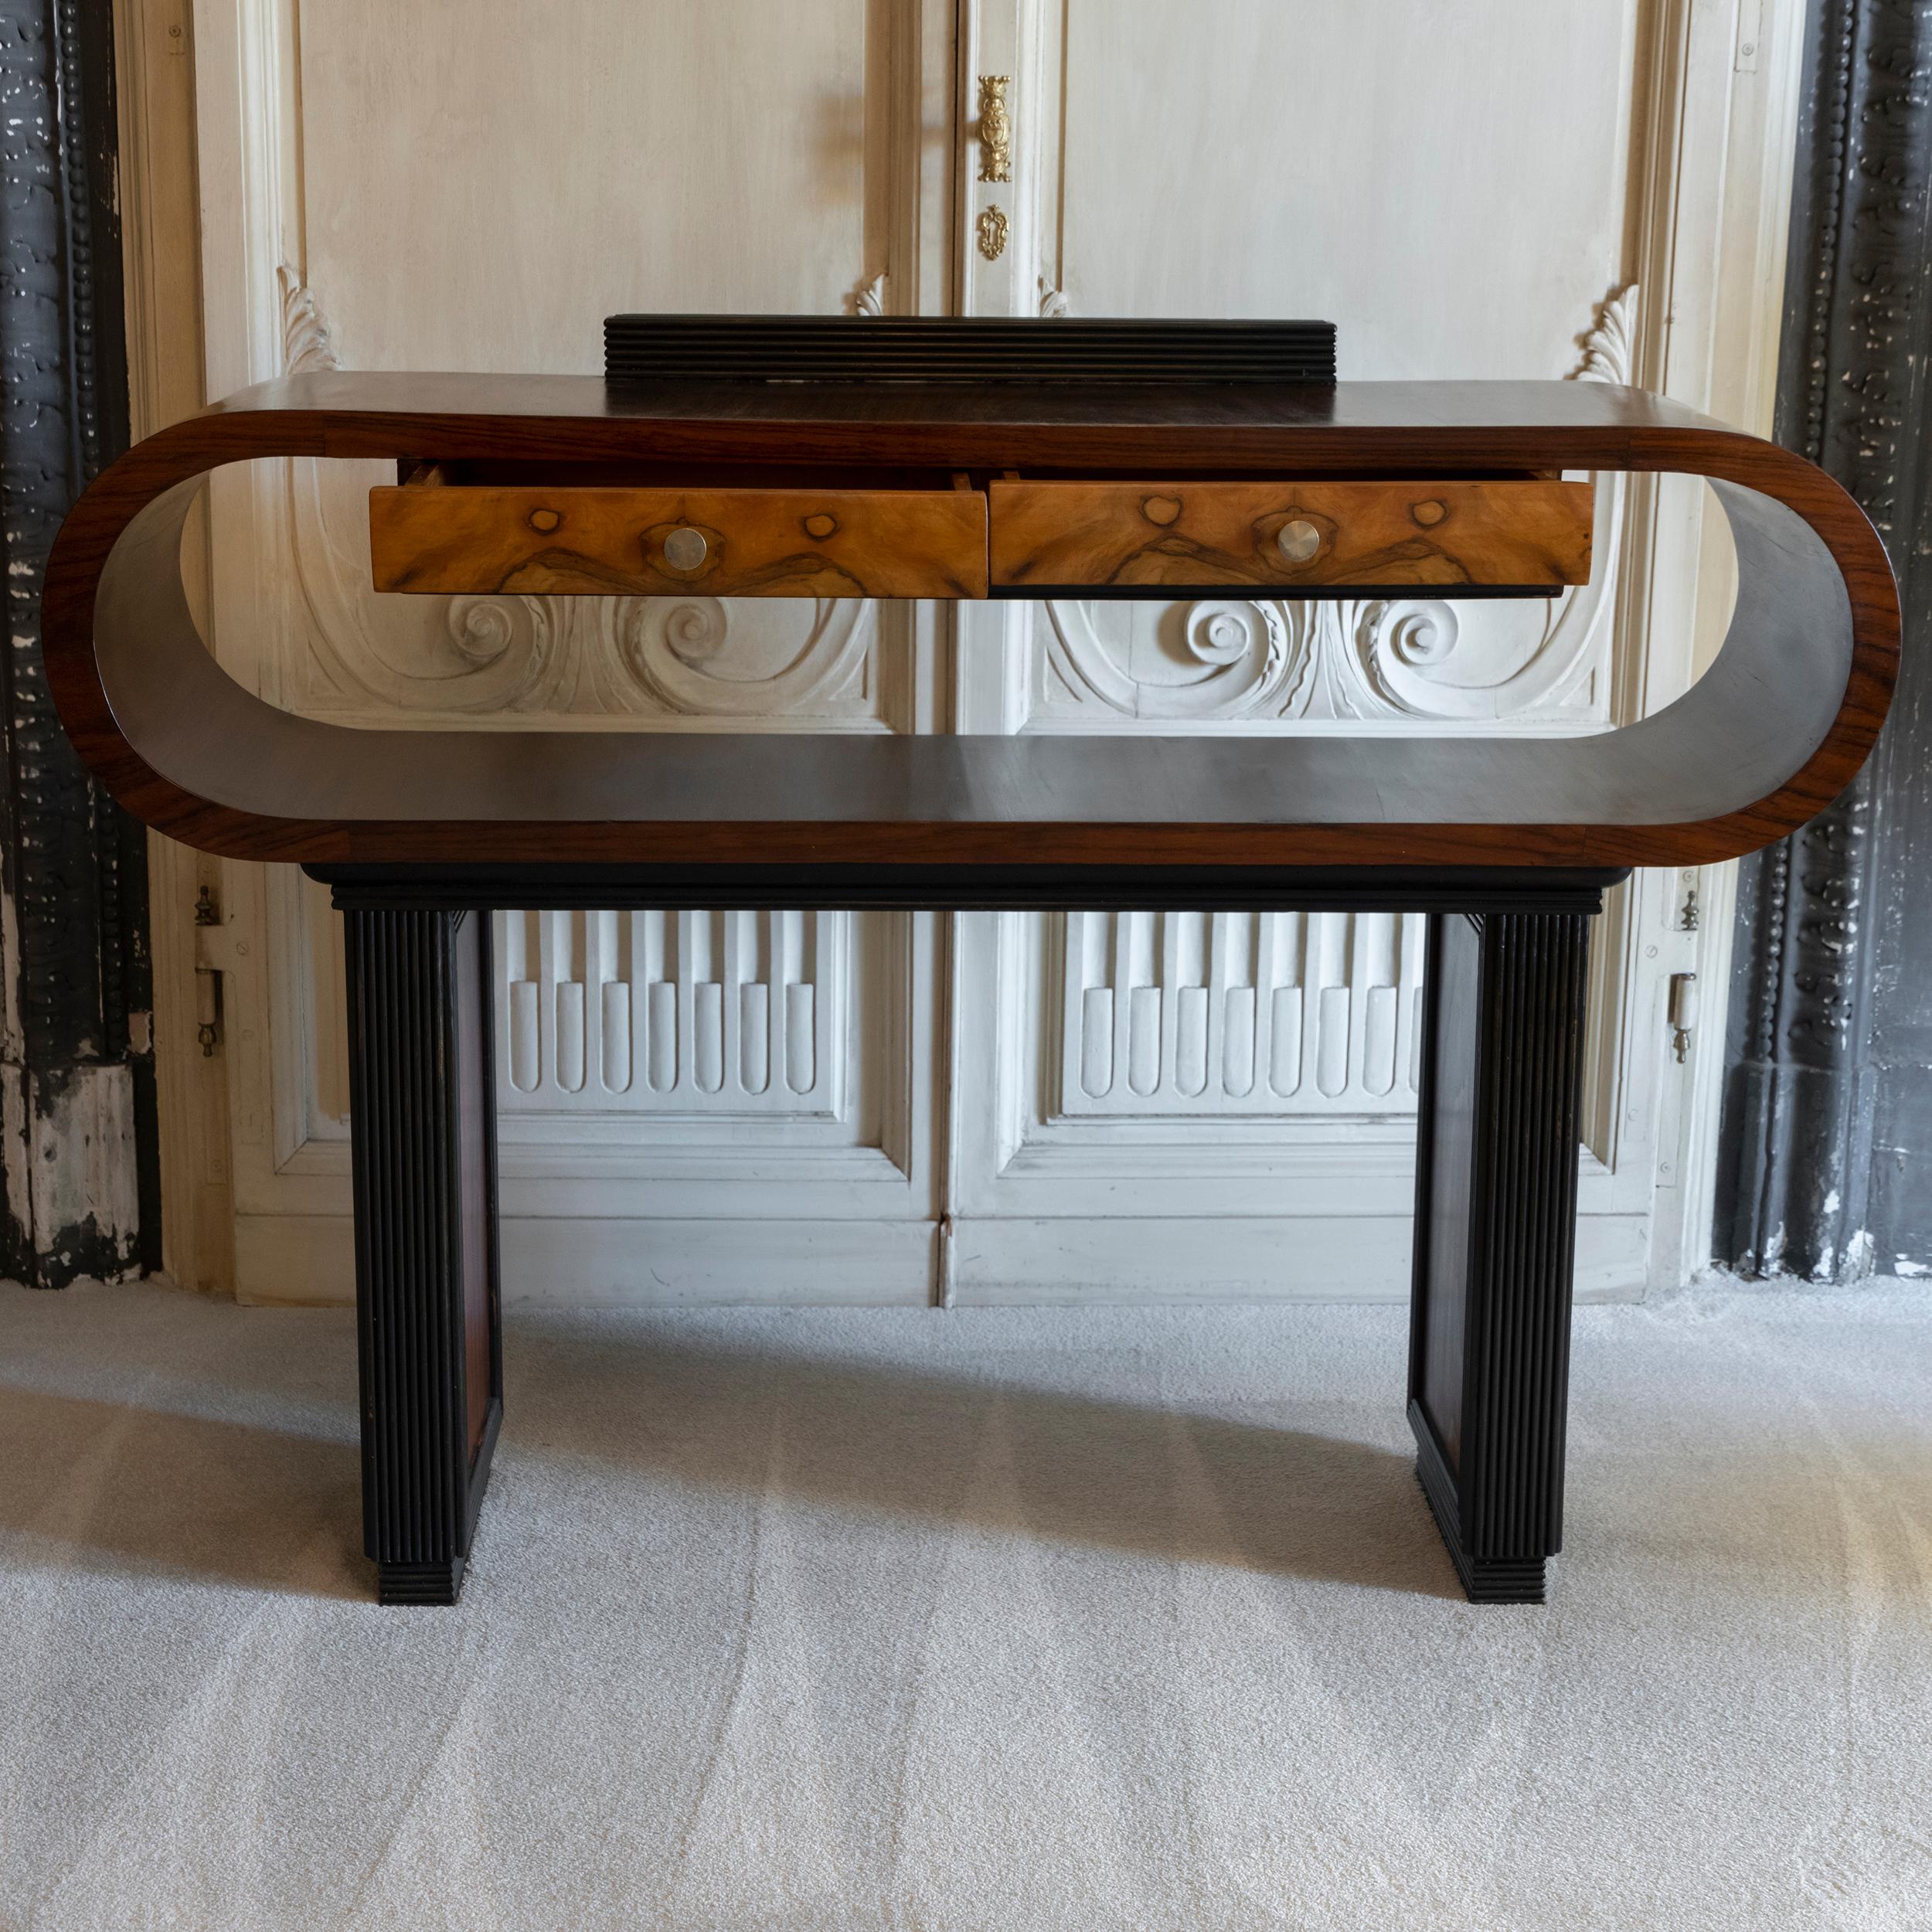 1930s Italian Deco Console Table with Drawers Palisander, Mahogany and Walnut For Sale 5